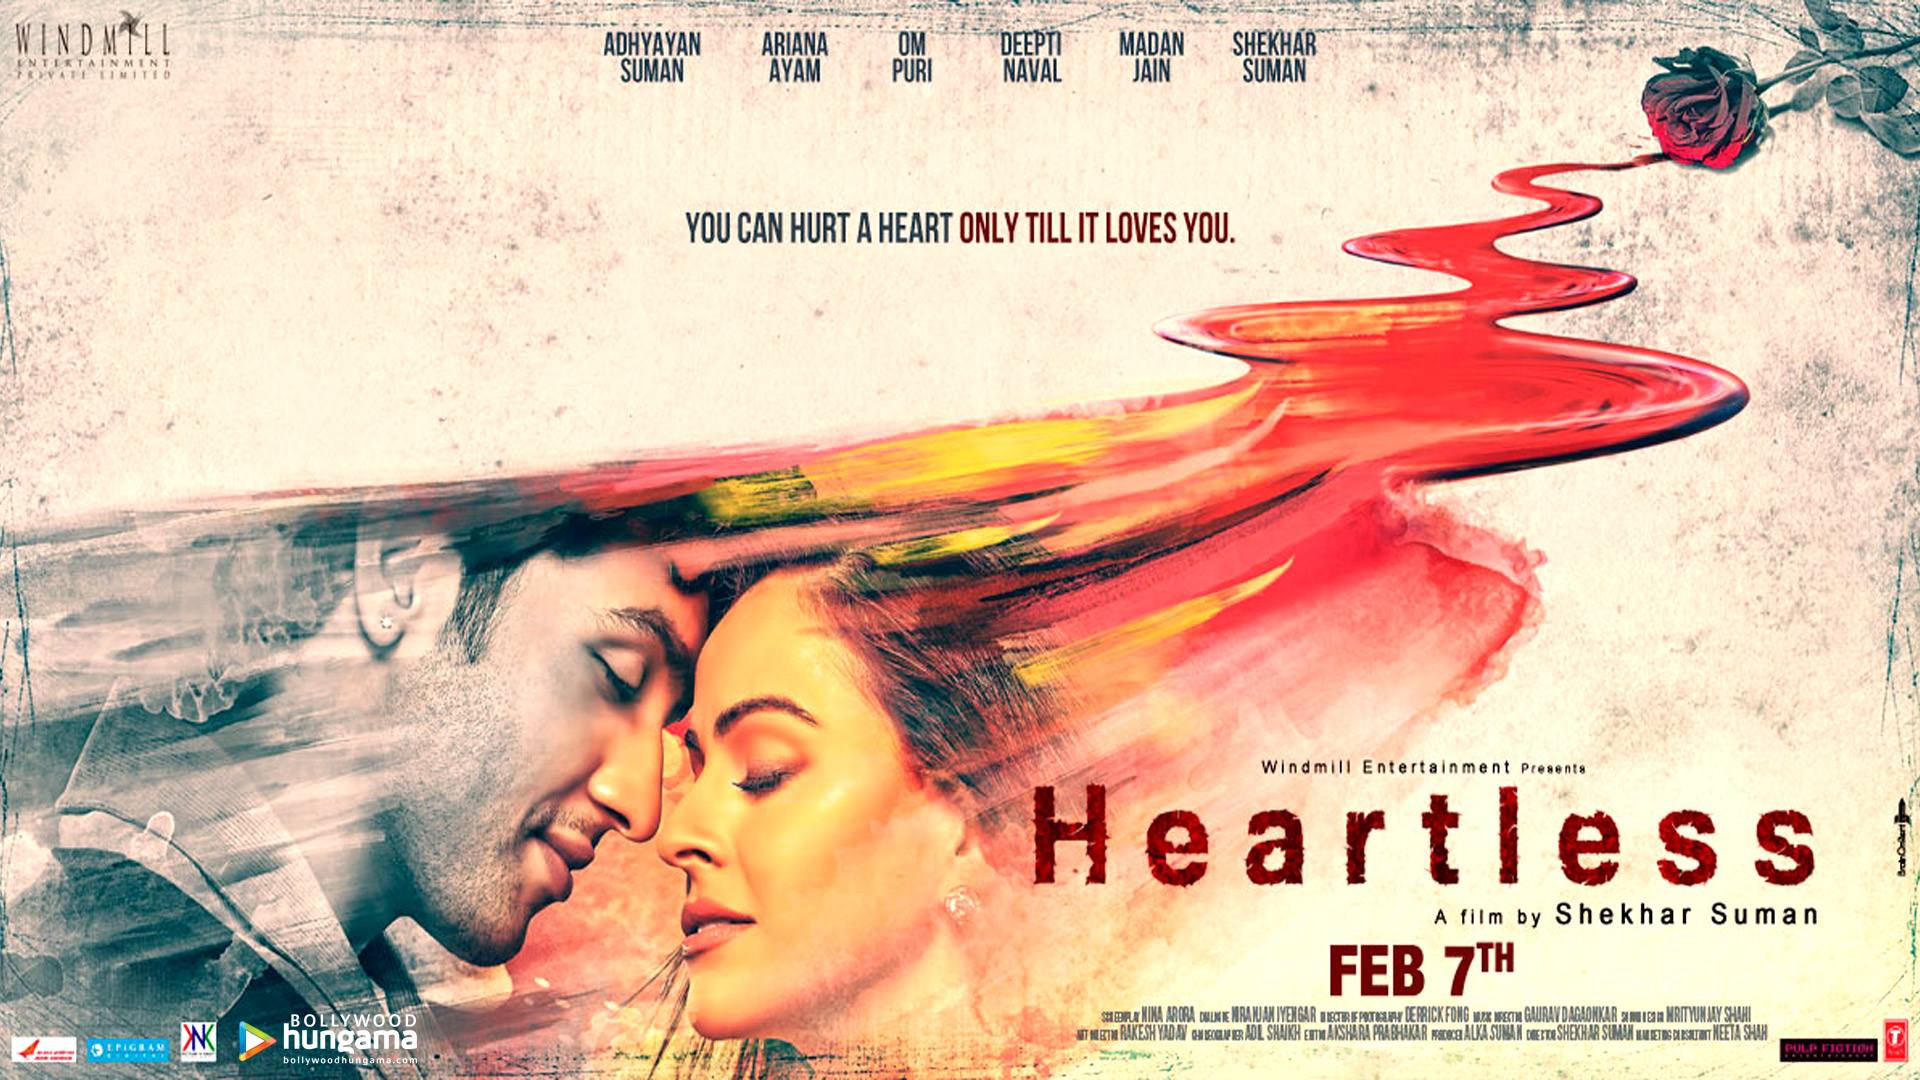 heartless hindi movie hd download torrent